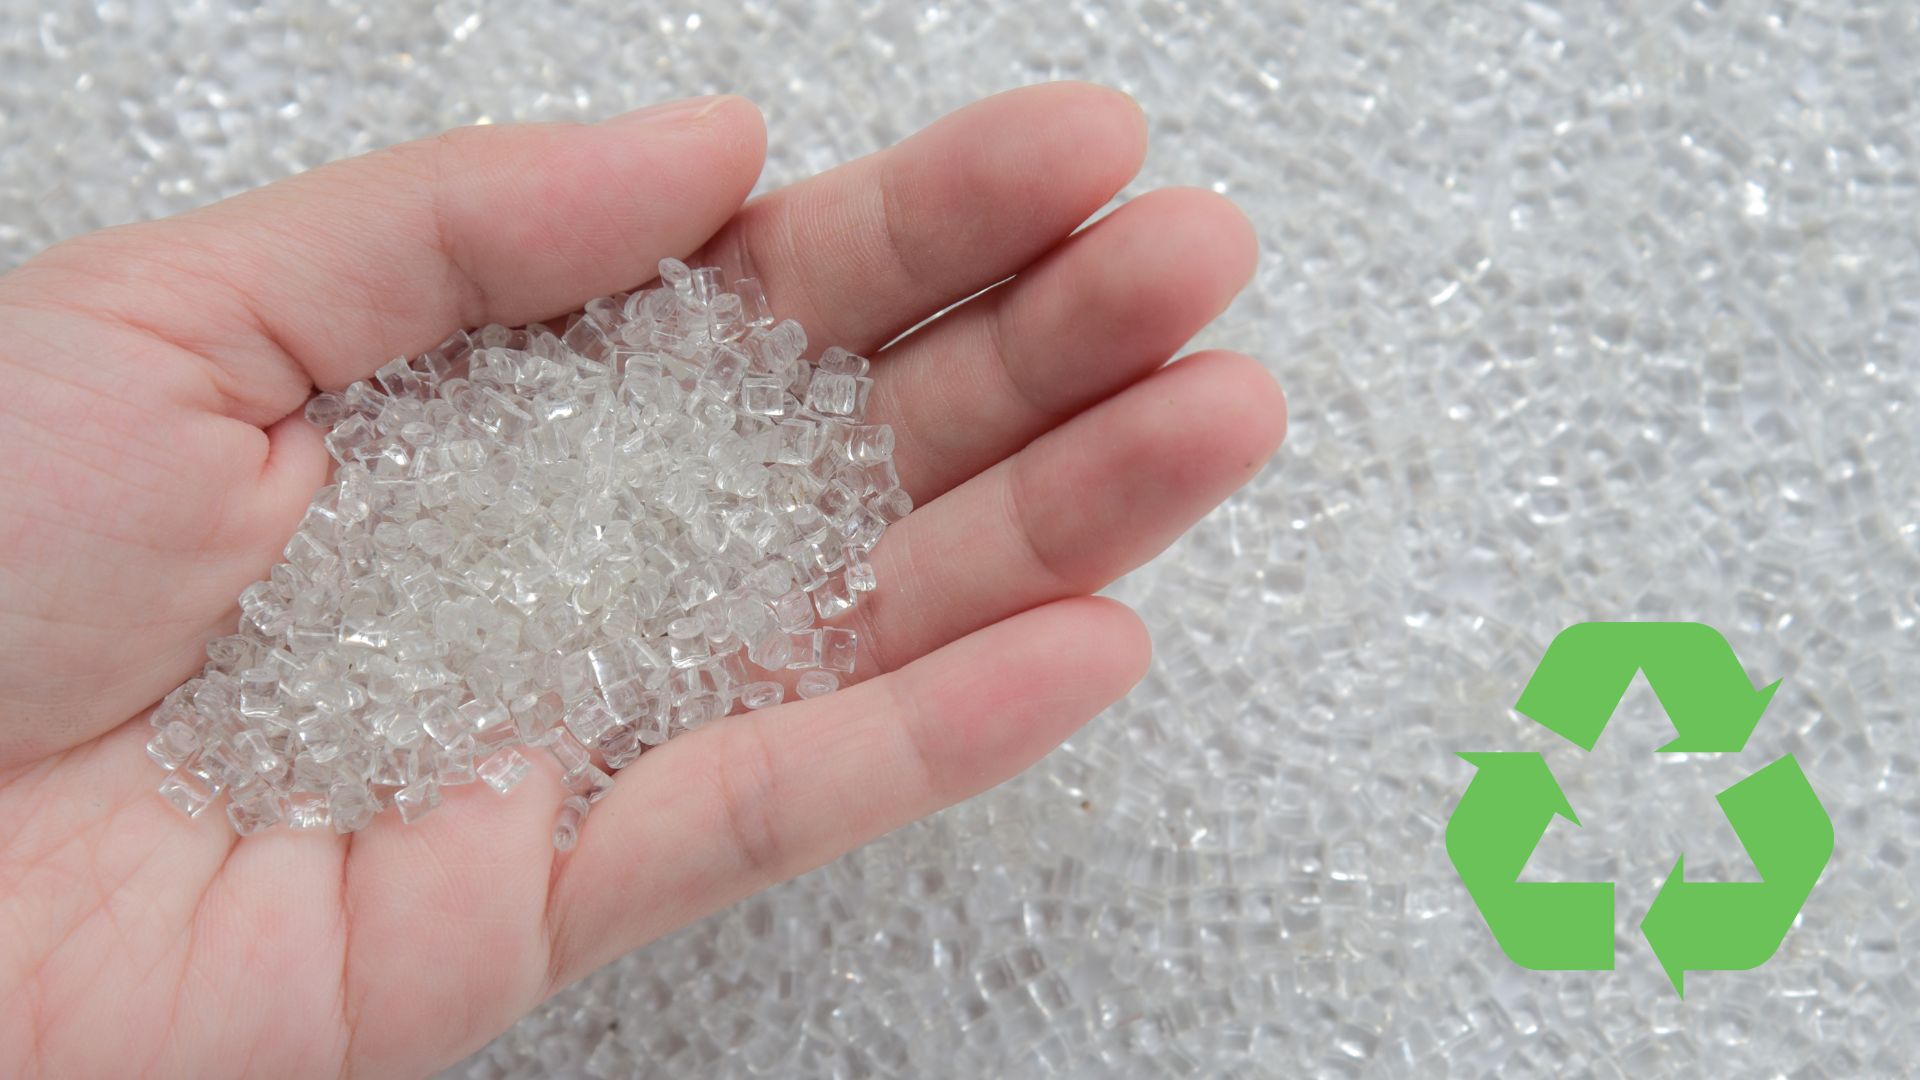 RPET - Recycled Polyester Plastic Pellets